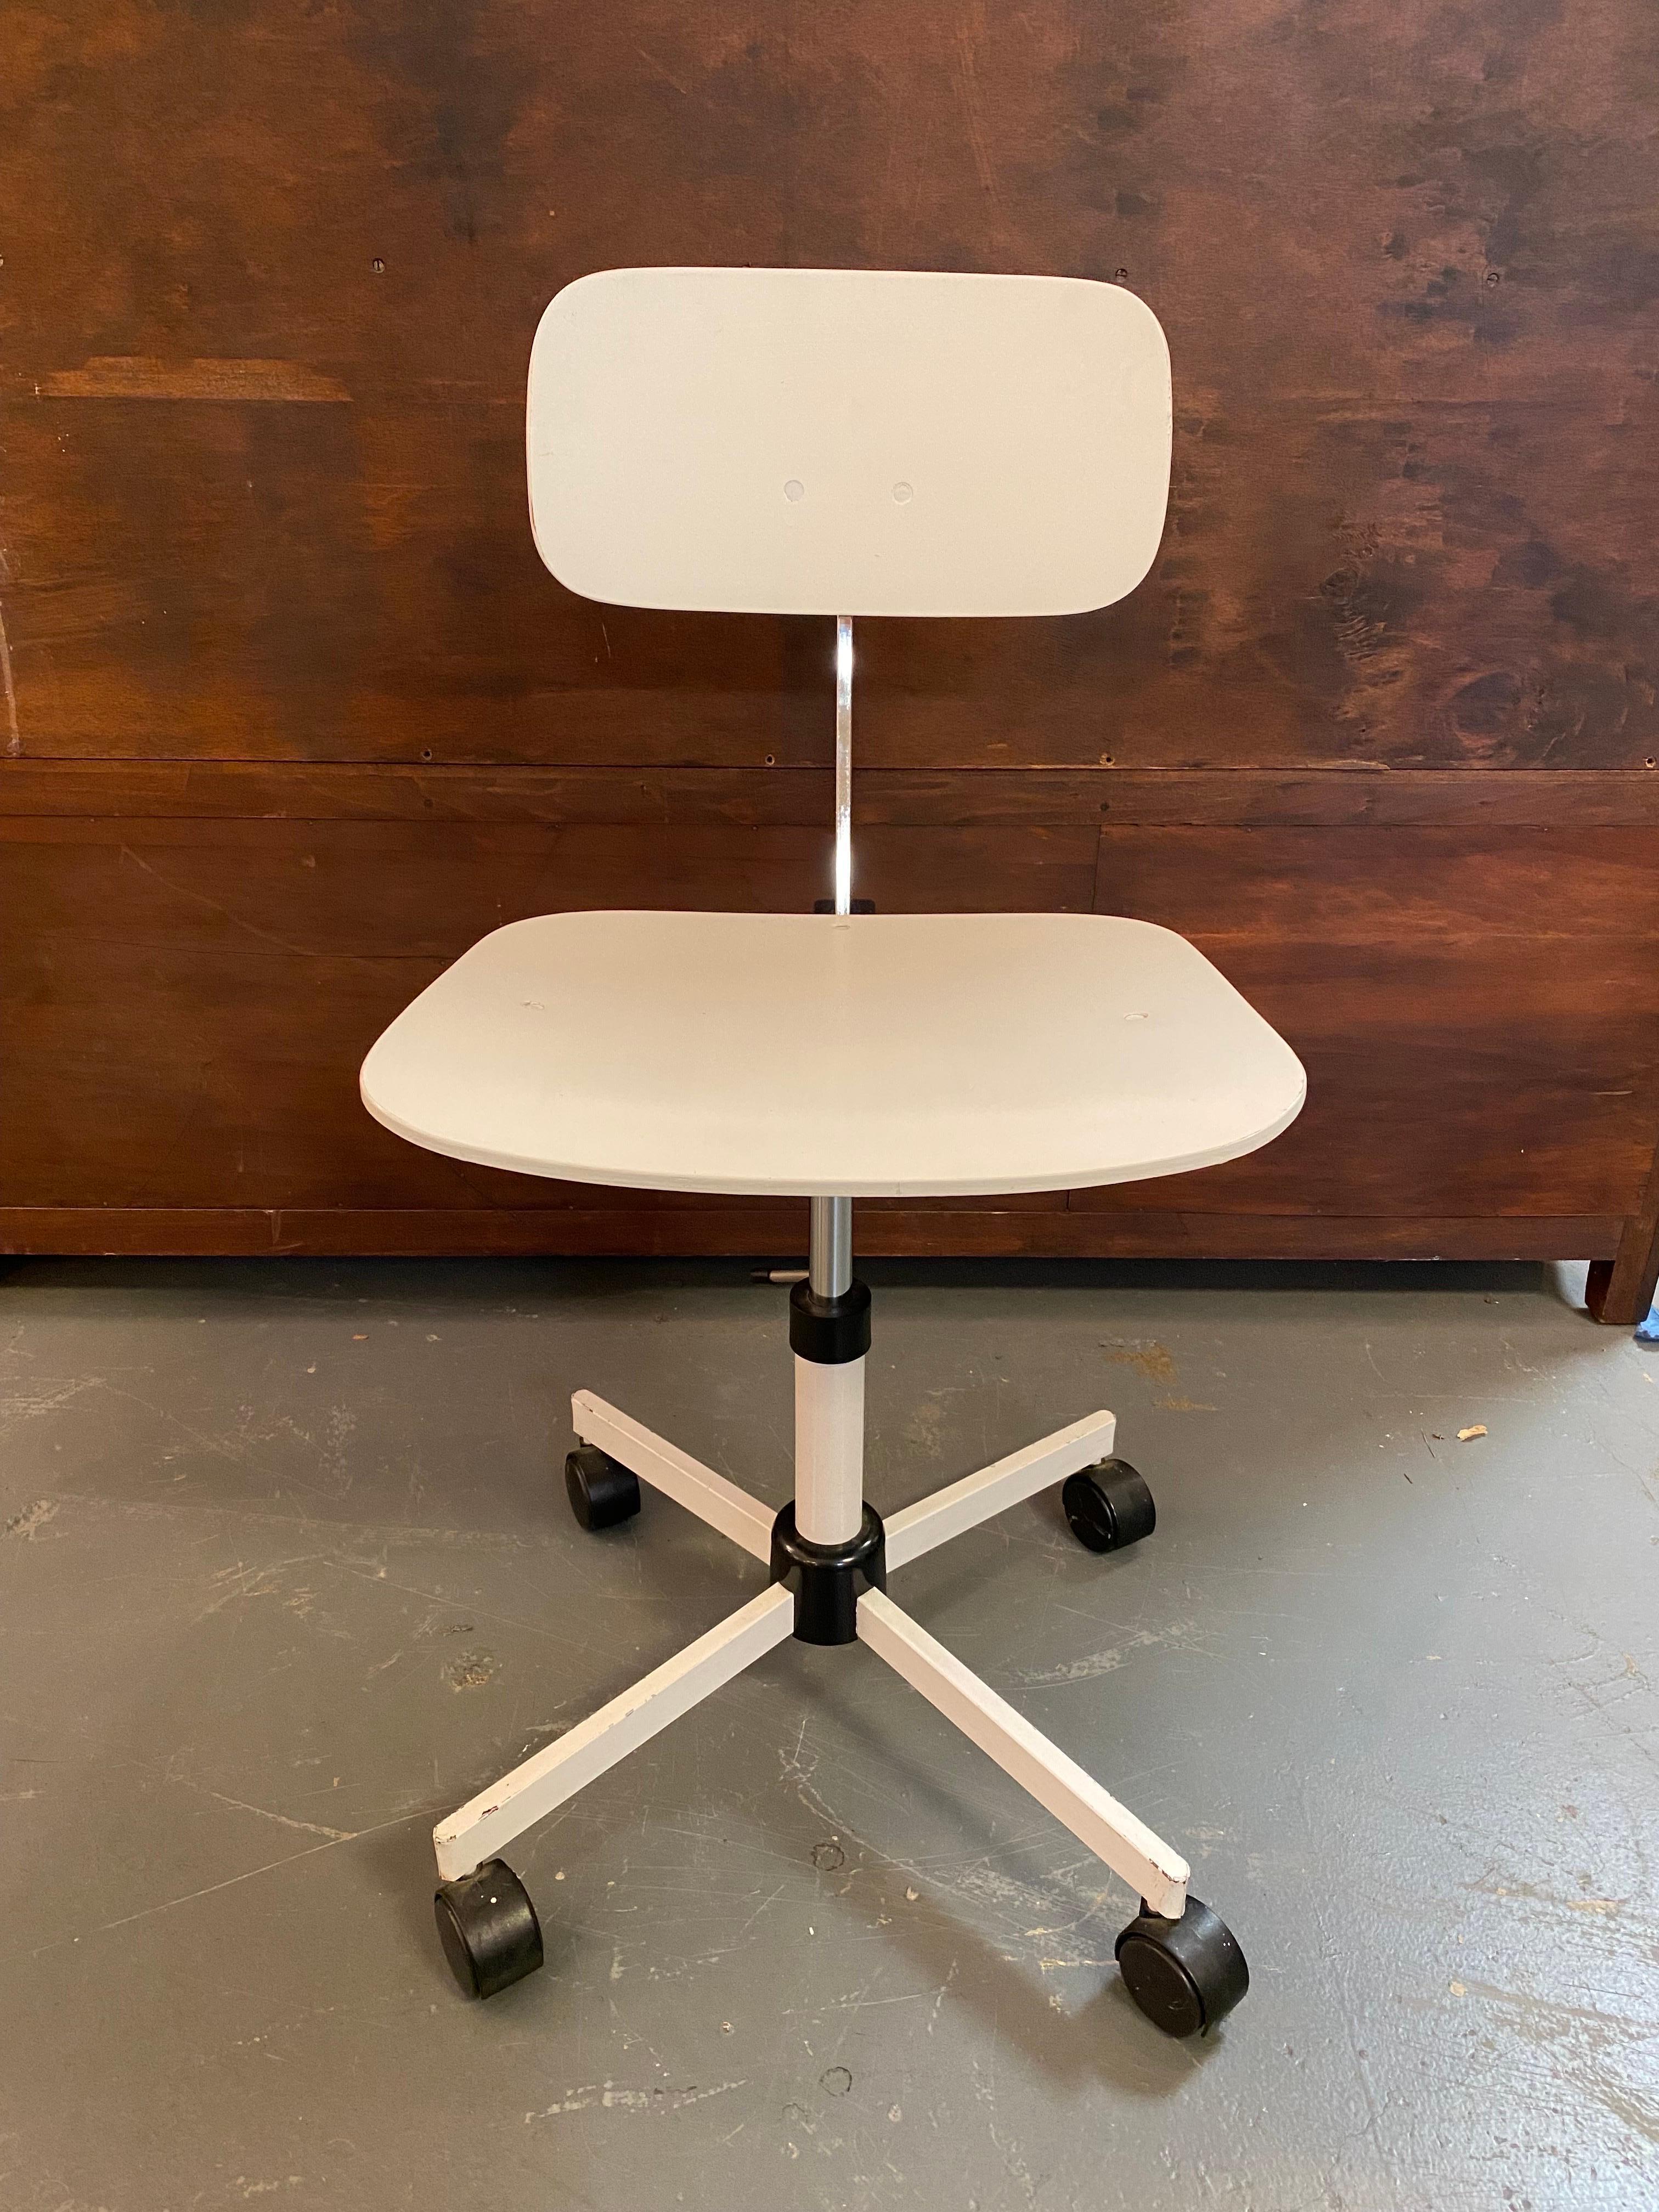 Beautiful white Kevi task chair or desk chair designed by Jorgen Rasmussen for Rabami. This Mid-Century Modern desk chair swivels. Height for seat and back are adjustable.

Cool piece that will brighten up your room. Don't miss out.

THis chair